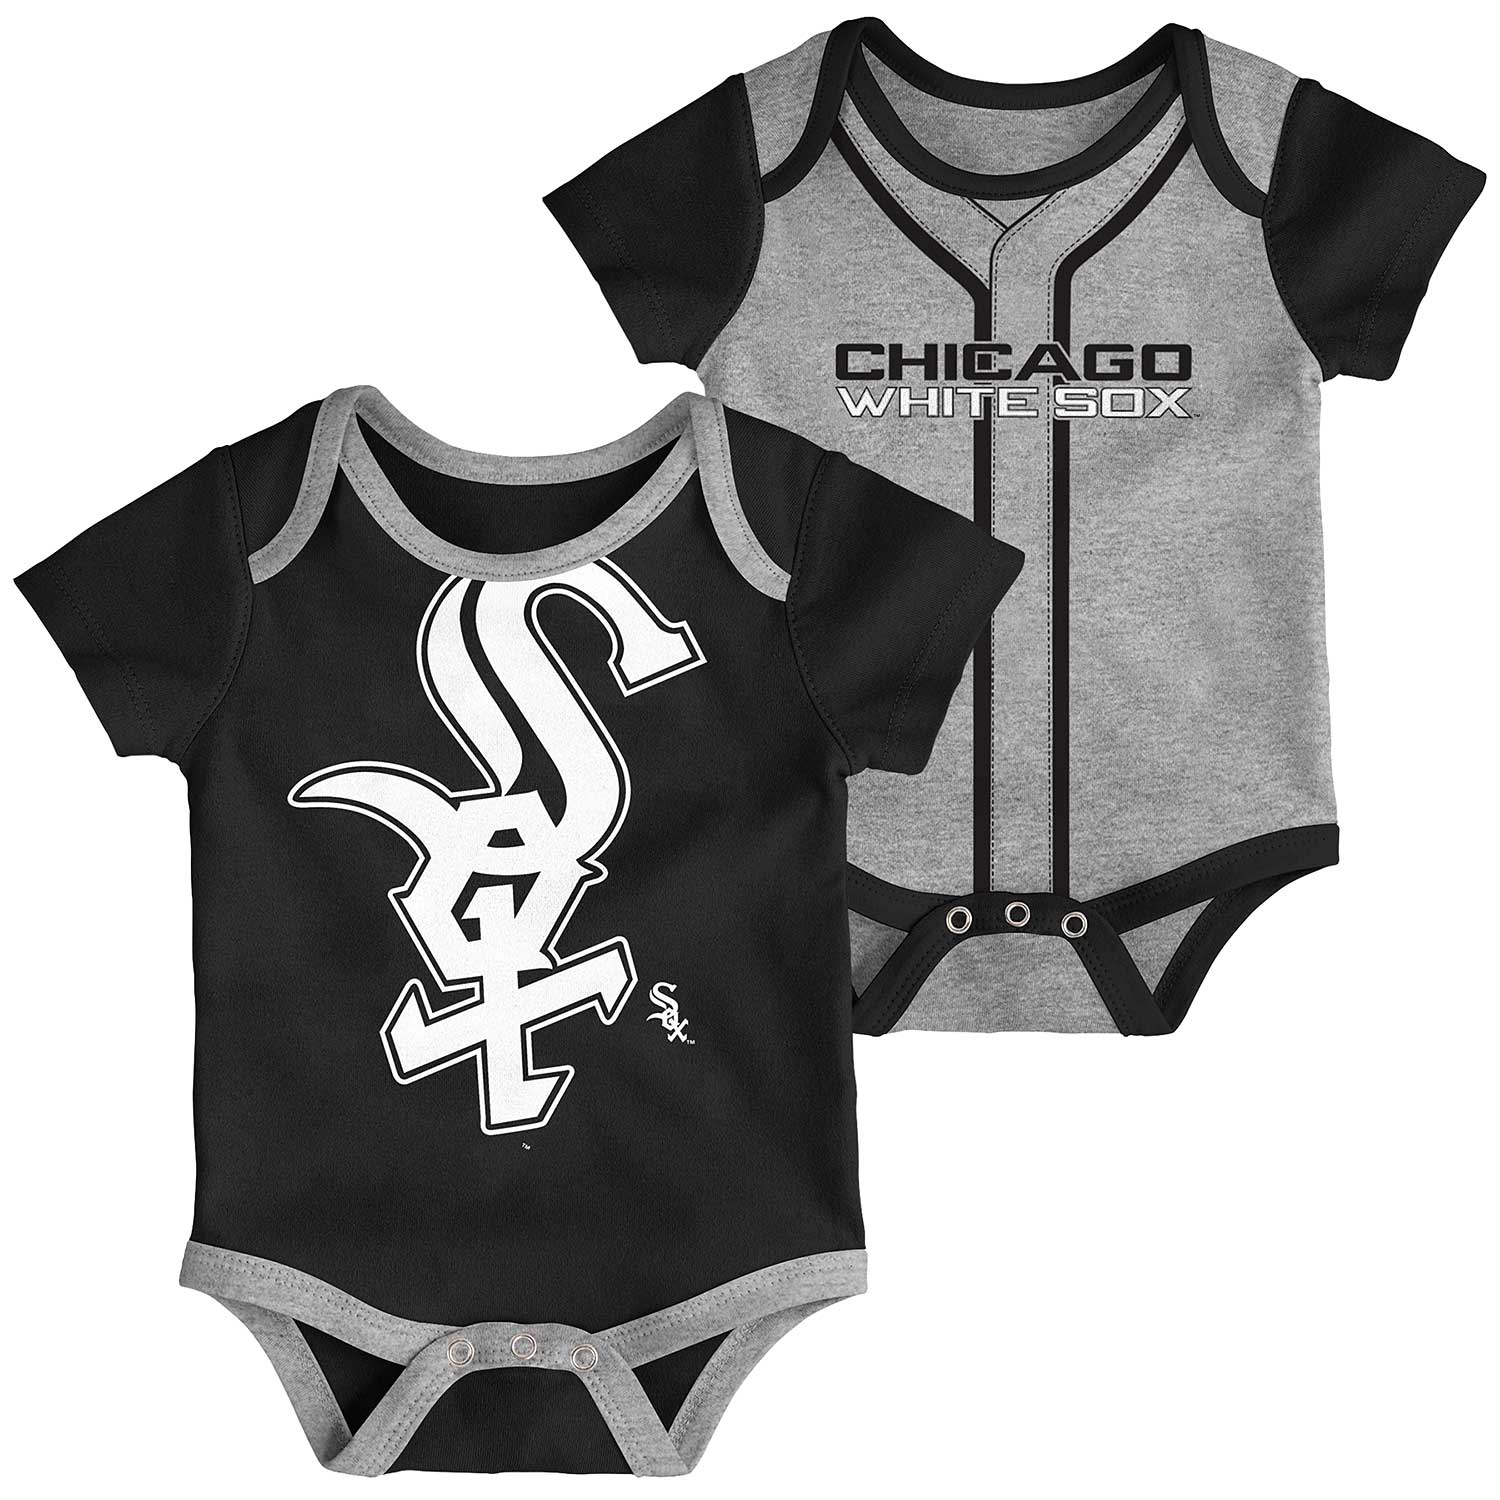 Official Baby Chicago White Sox Gear, Toddler, White Sox Newborn